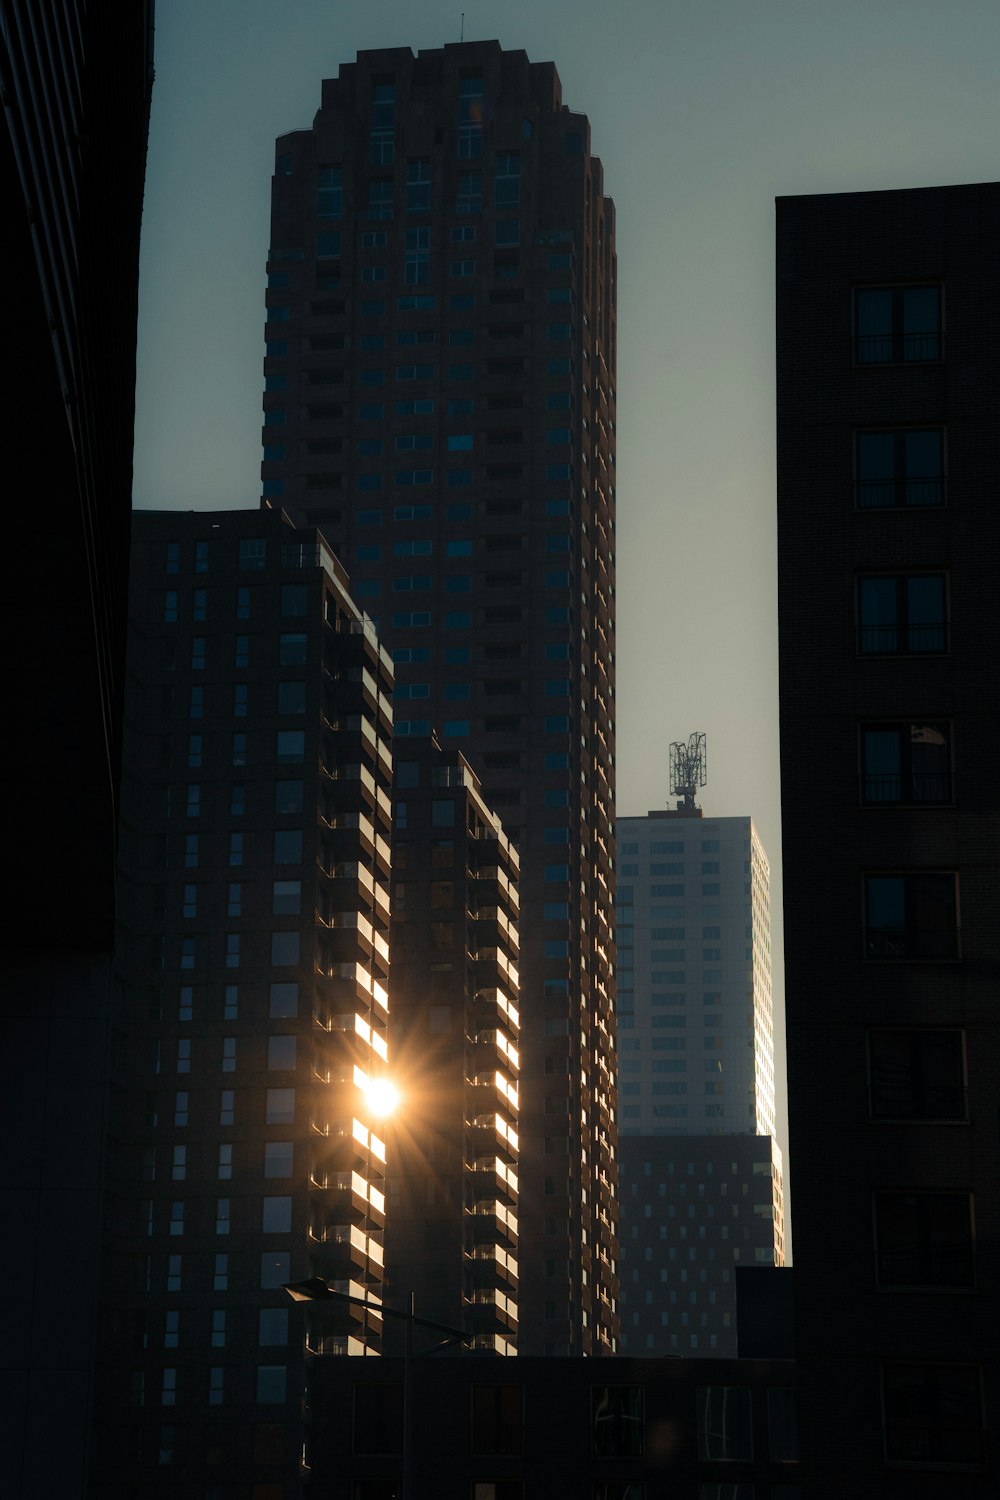 the sun shines brightly through the windows of tall buildings